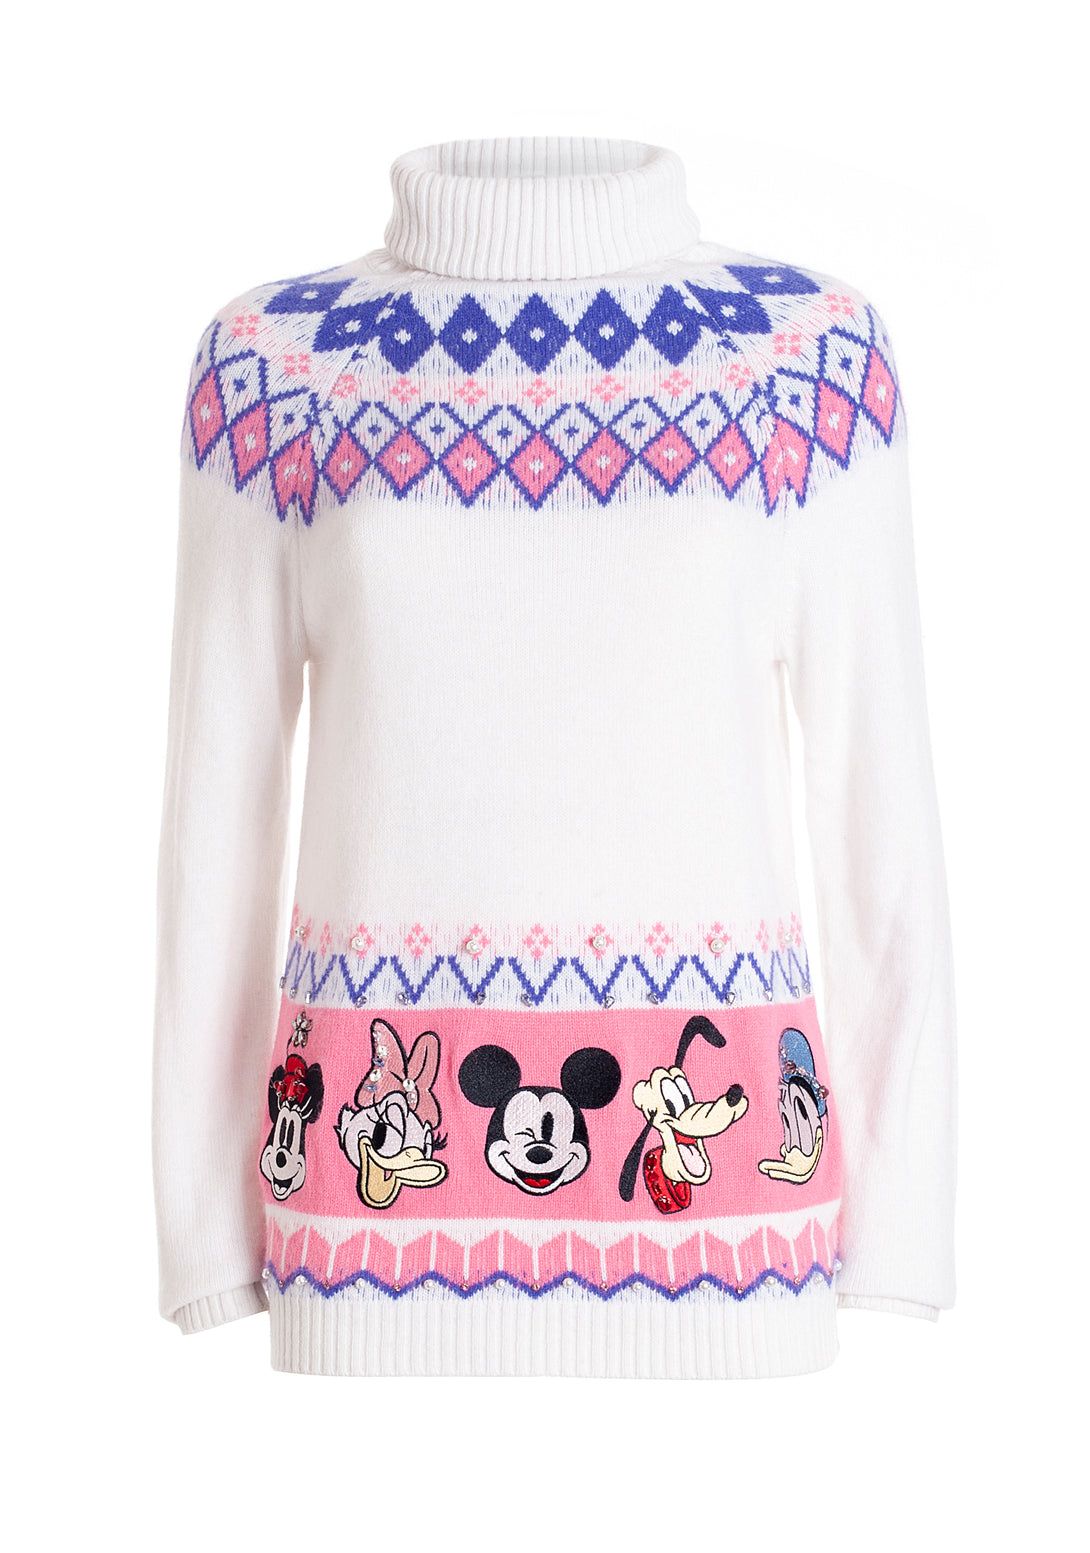 Knitwear regular fit made in angora and wool and with Disney's jacquard effect